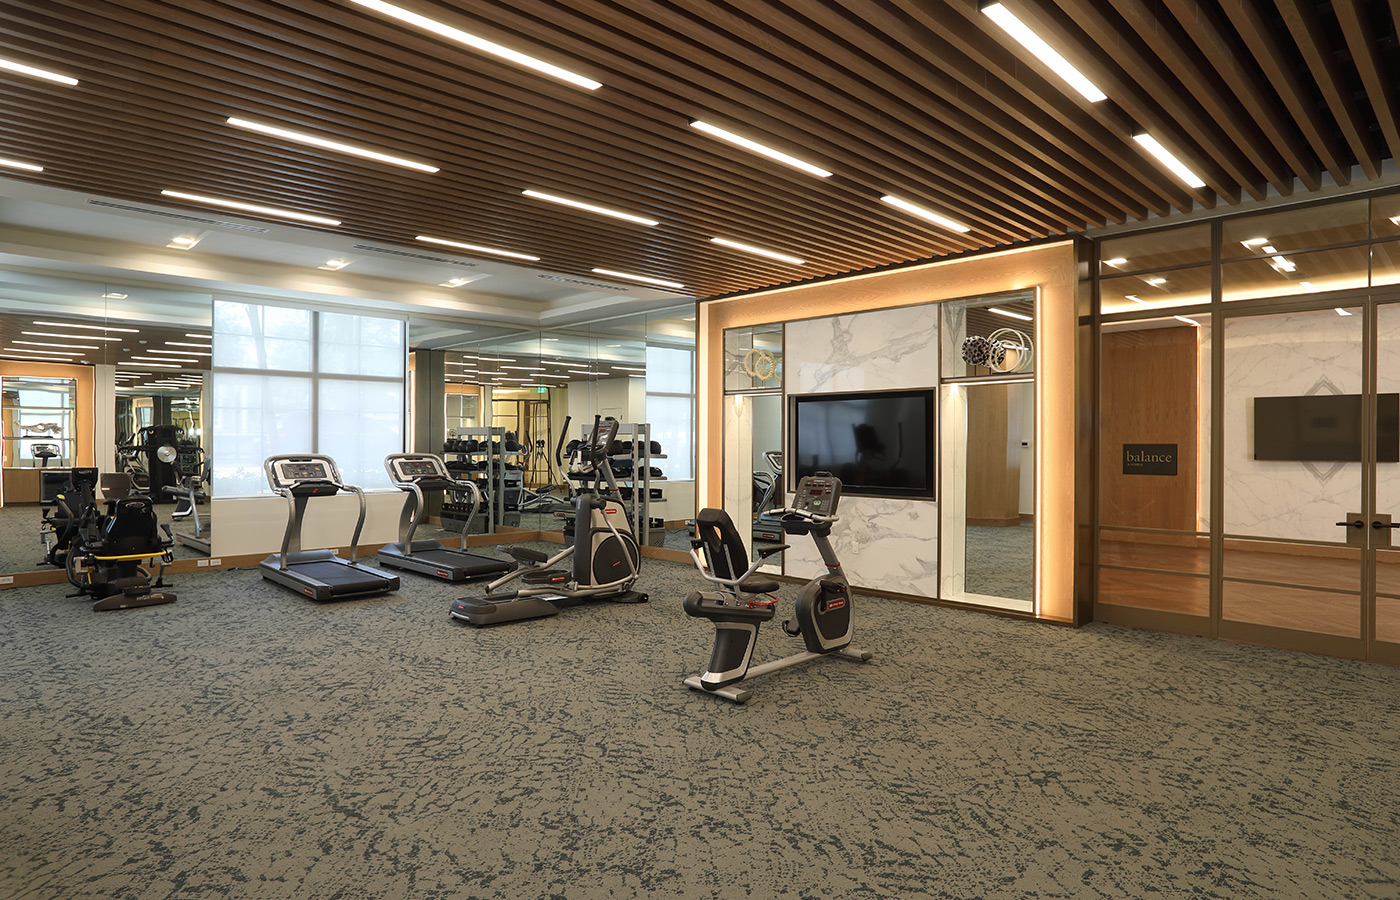 The fitness center at The Watermark at West Palm Beach.